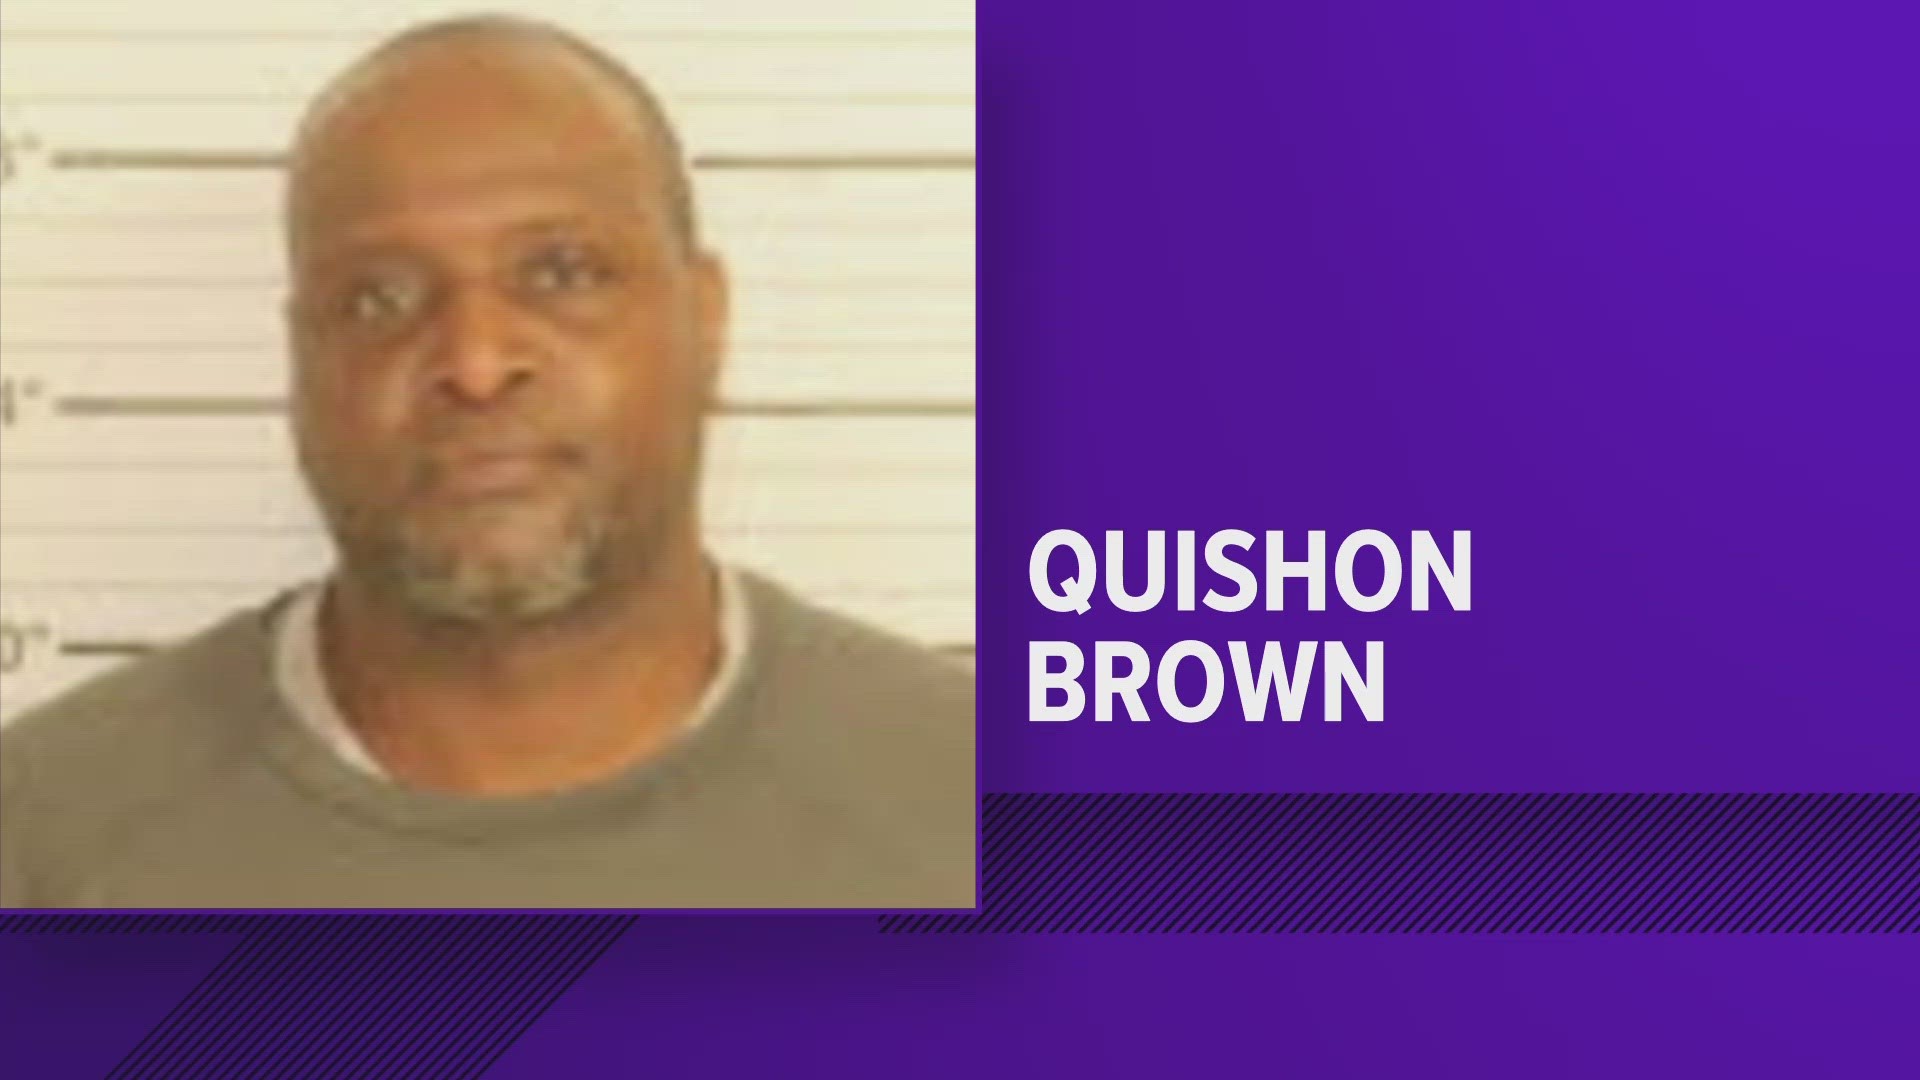 Quishon Brown, the man accused of setting a dog on fire in July, had his bond decreased from $150,000 to $5,000 in court Thursday, April 6.